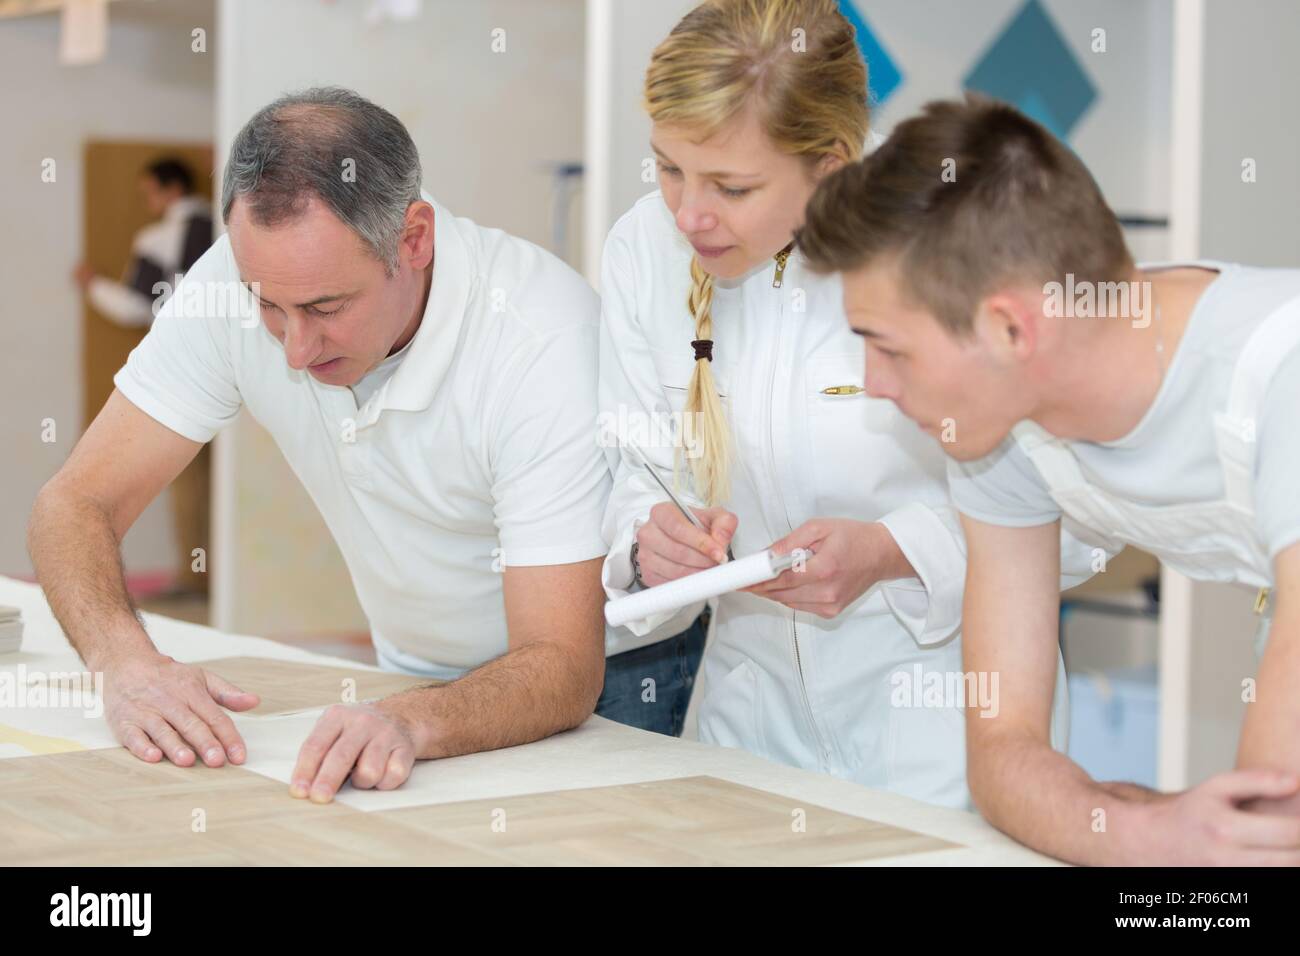 female and male apprentices with teacher Stock Photo